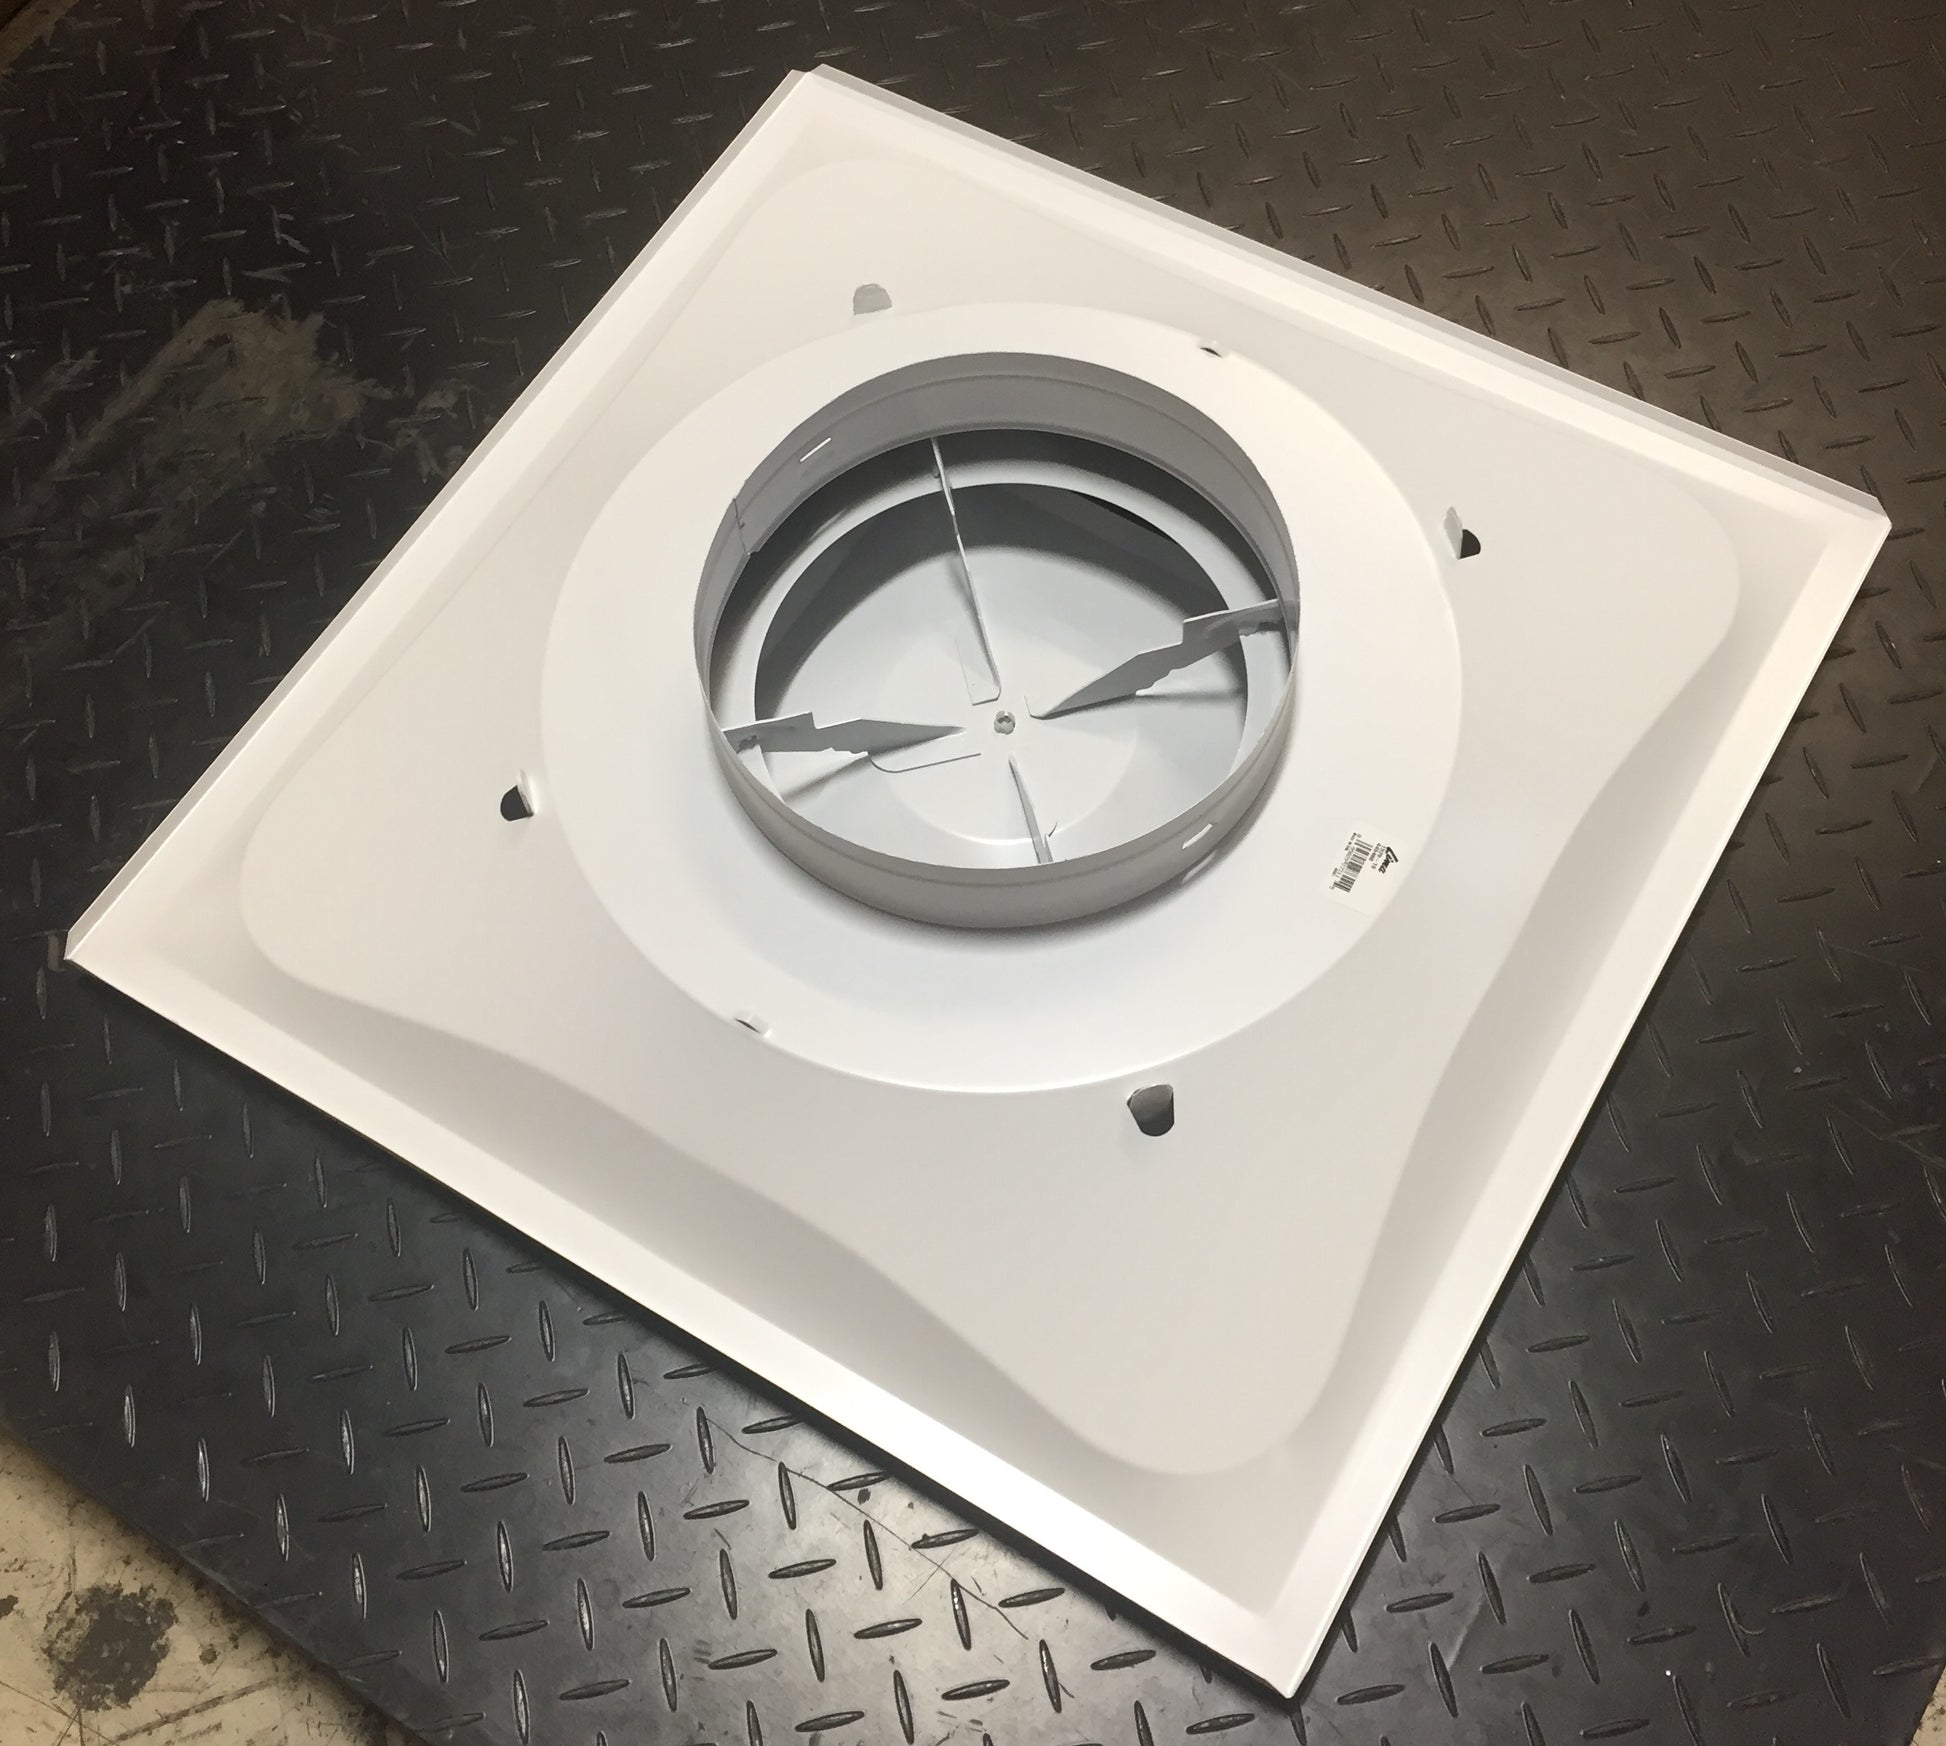 10" SERIES 1520 STEP-DOWN CEILING SQUARE DIFFUSER, SOLD AS 2 PER BOX